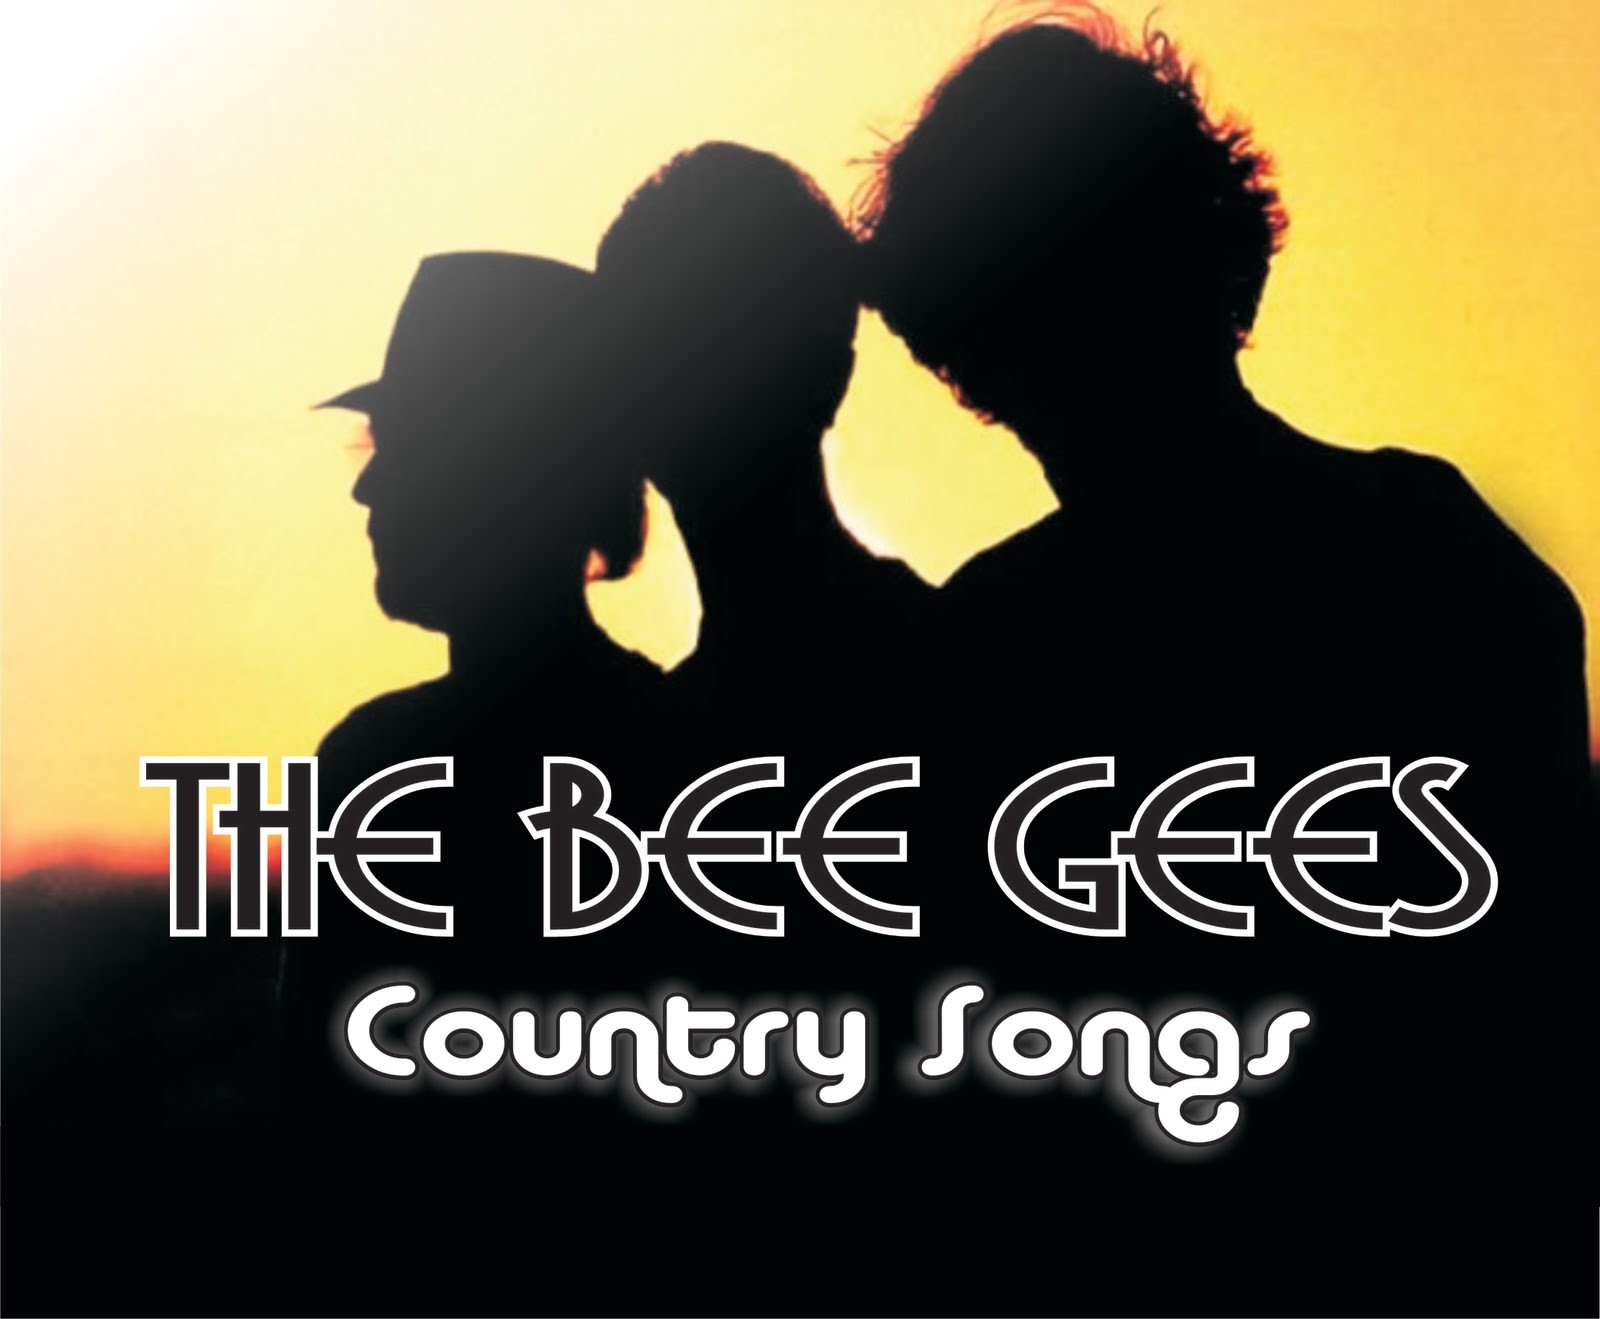 BEEGEES COUNTRY SONGS